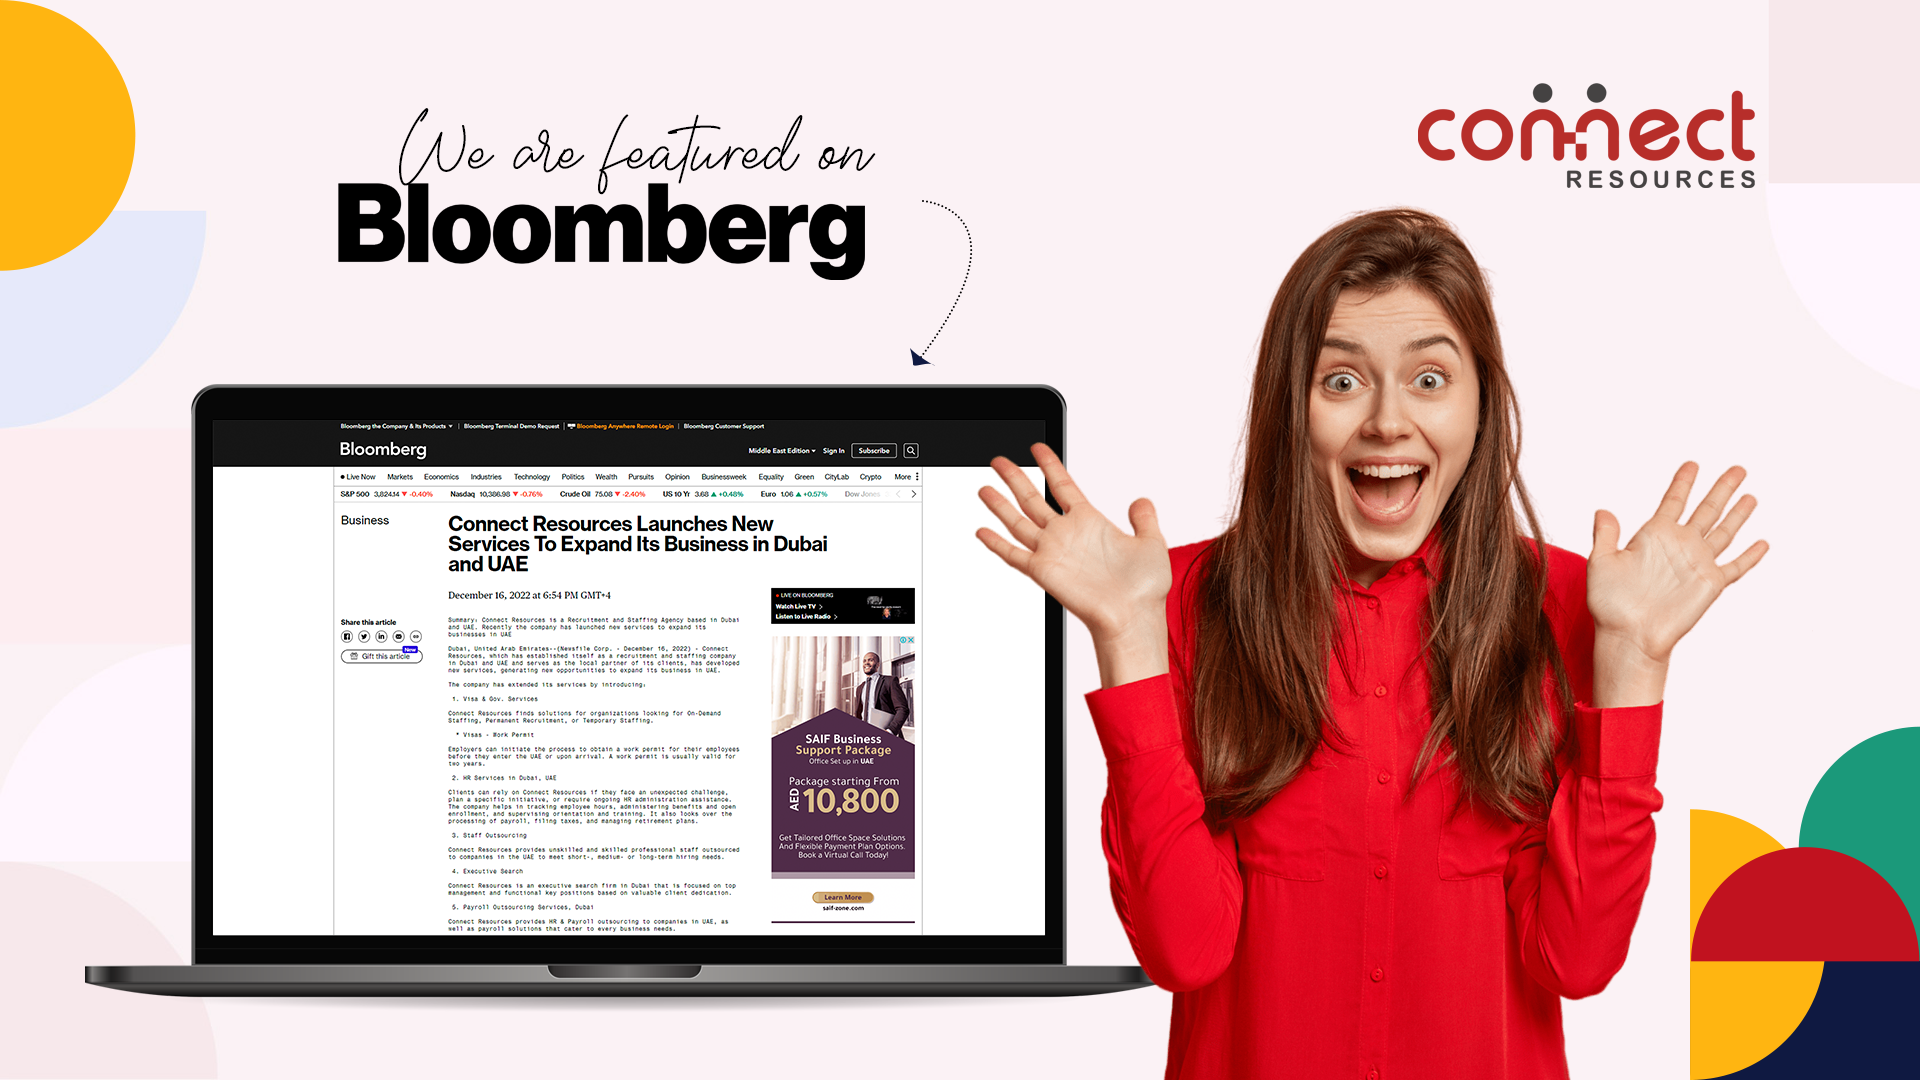 Connect Resources has been featured in Bloomberg